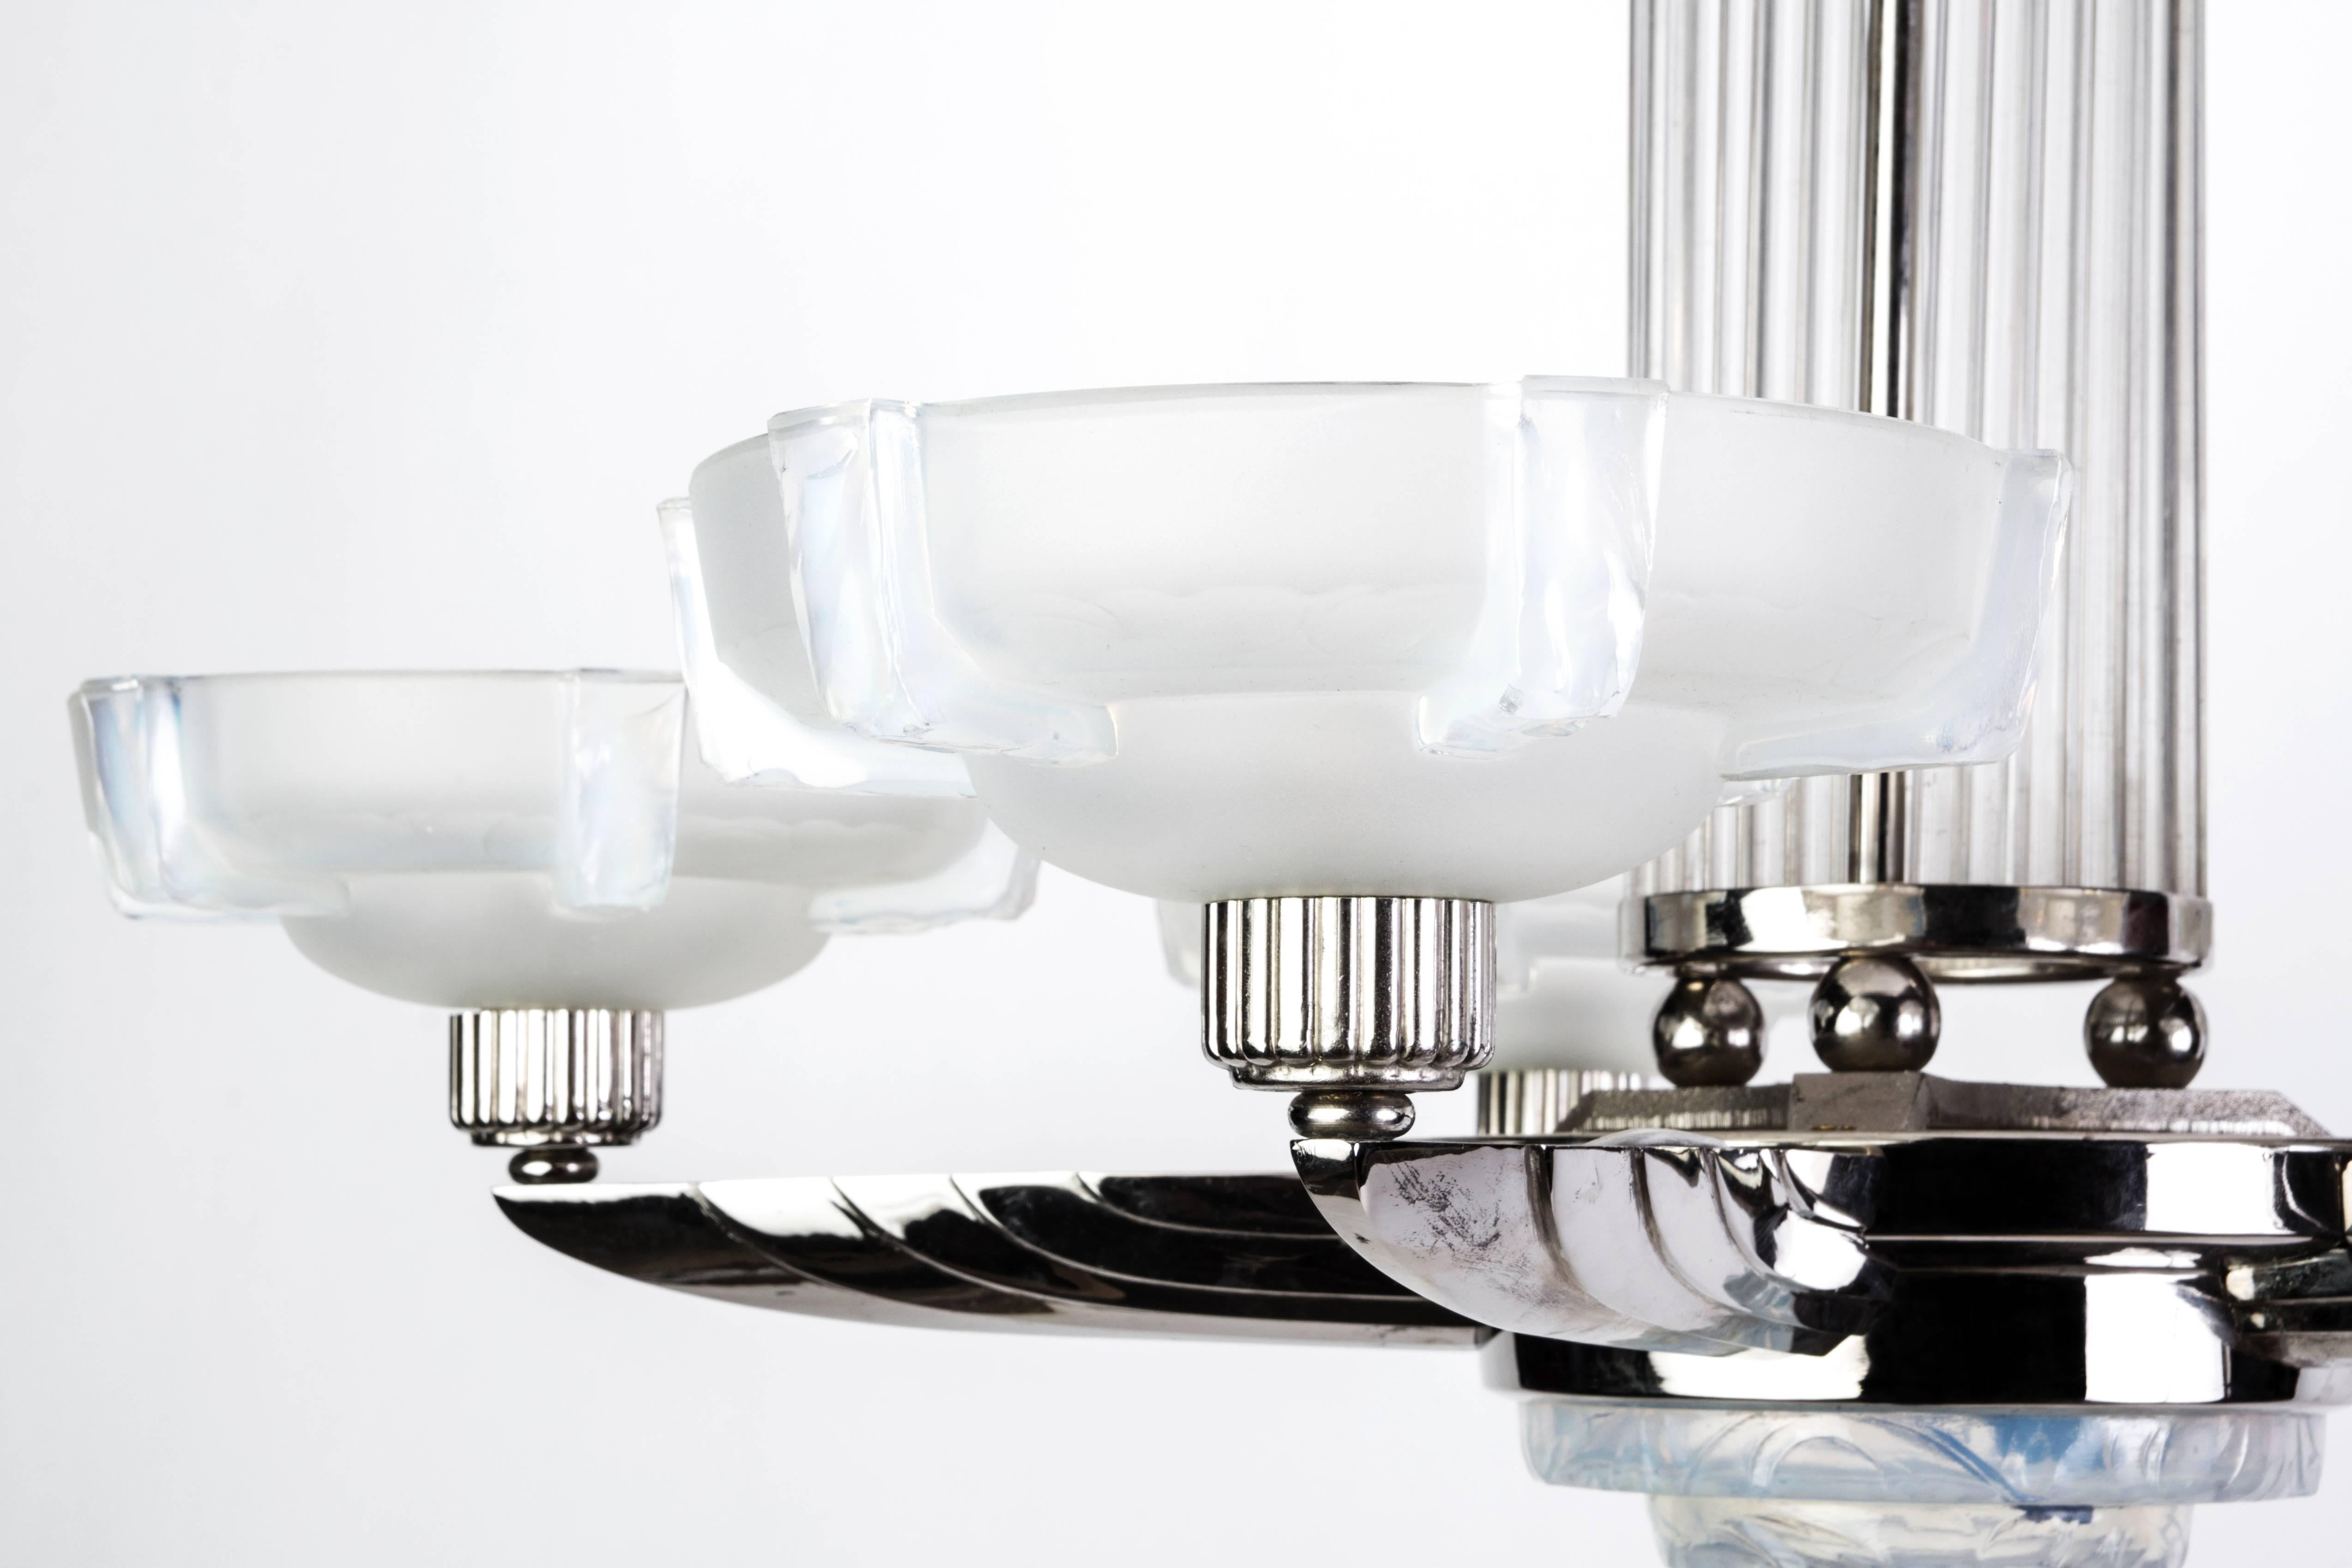 This stunning 1920s French Art Deco chandelier was designed and signed by Petitot. It features a nickel-plated frame with tubular glass rods with relief frosted opalescent glass shades.

